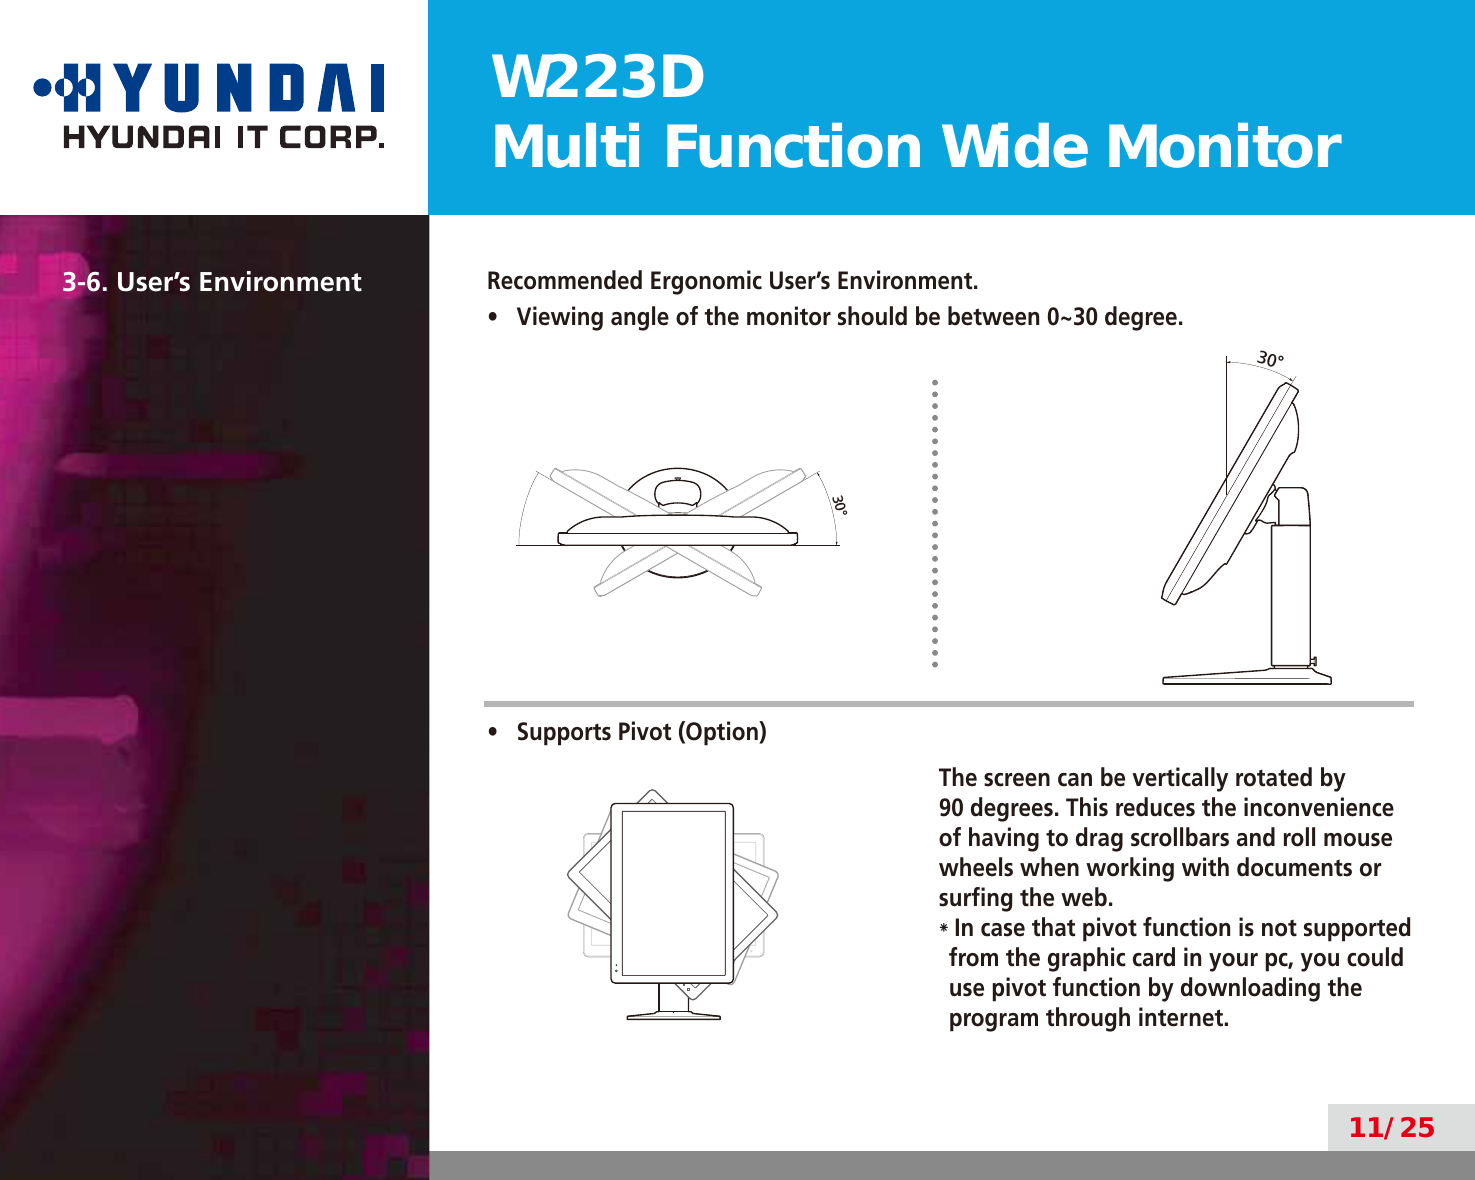 W223DMulti Function Wide Monitor11/2530°30°3-6. User’s EnvironmentRecommended Ergonomic User’s Environment.•  Viewing angle of the monitor should be between 0~30 degree.•  Supports Pivot (Option)The screen can be vertically rotated by  90 degrees. This reduces the inconvenience of having to drag scrollbars and roll mouse wheels when working with documents or surﬁng the web.*  In case that pivot function is not supported from the graphic card in your pc, you could use pivot function by downloading the program through internet.